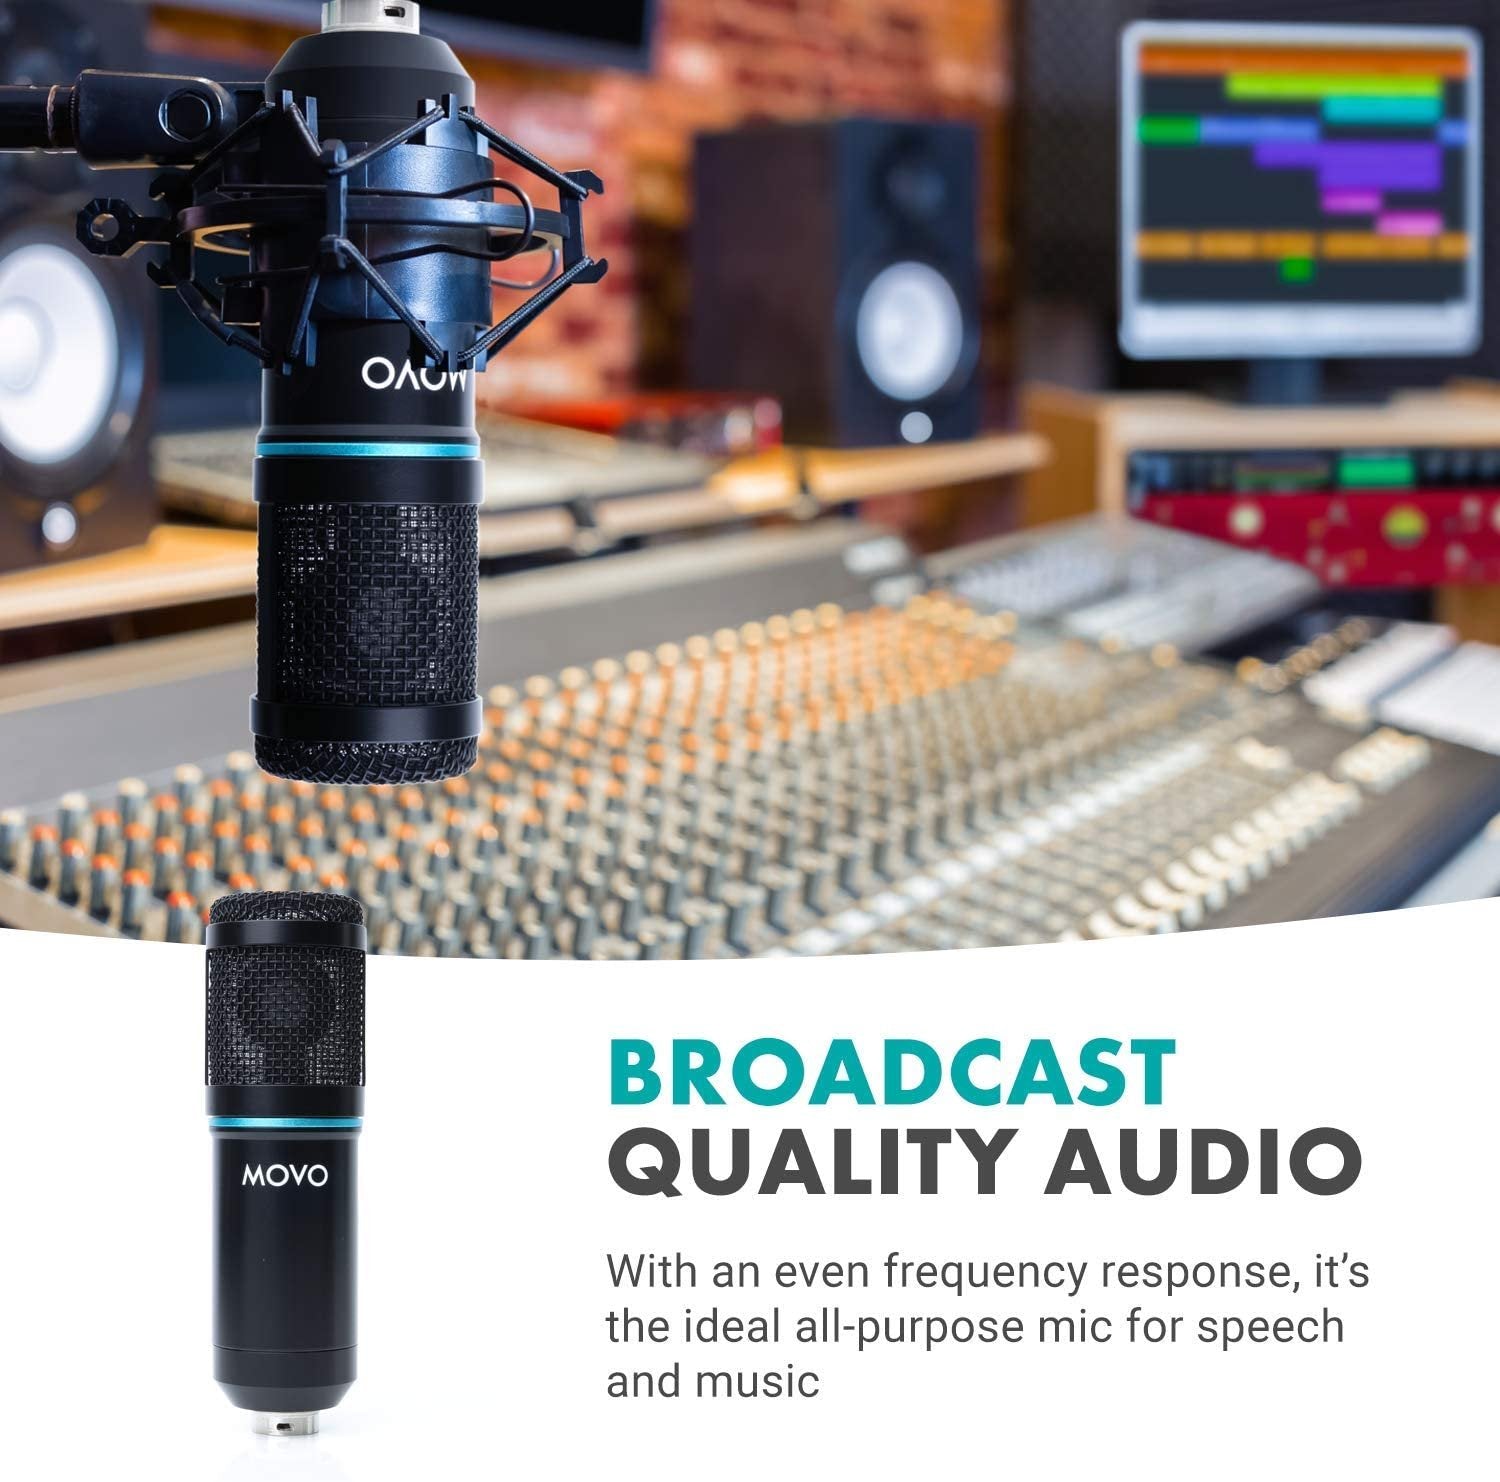 Movo 2-Pack Universal XLR Condenser Microphone Podcasting Equipment Bundle for 2 - Includes 2 Cardioid Mics, Desktop Stands, Shock Mounts, Pop Filters and Cables - Podcast, Zoom, and Youtuber Kit